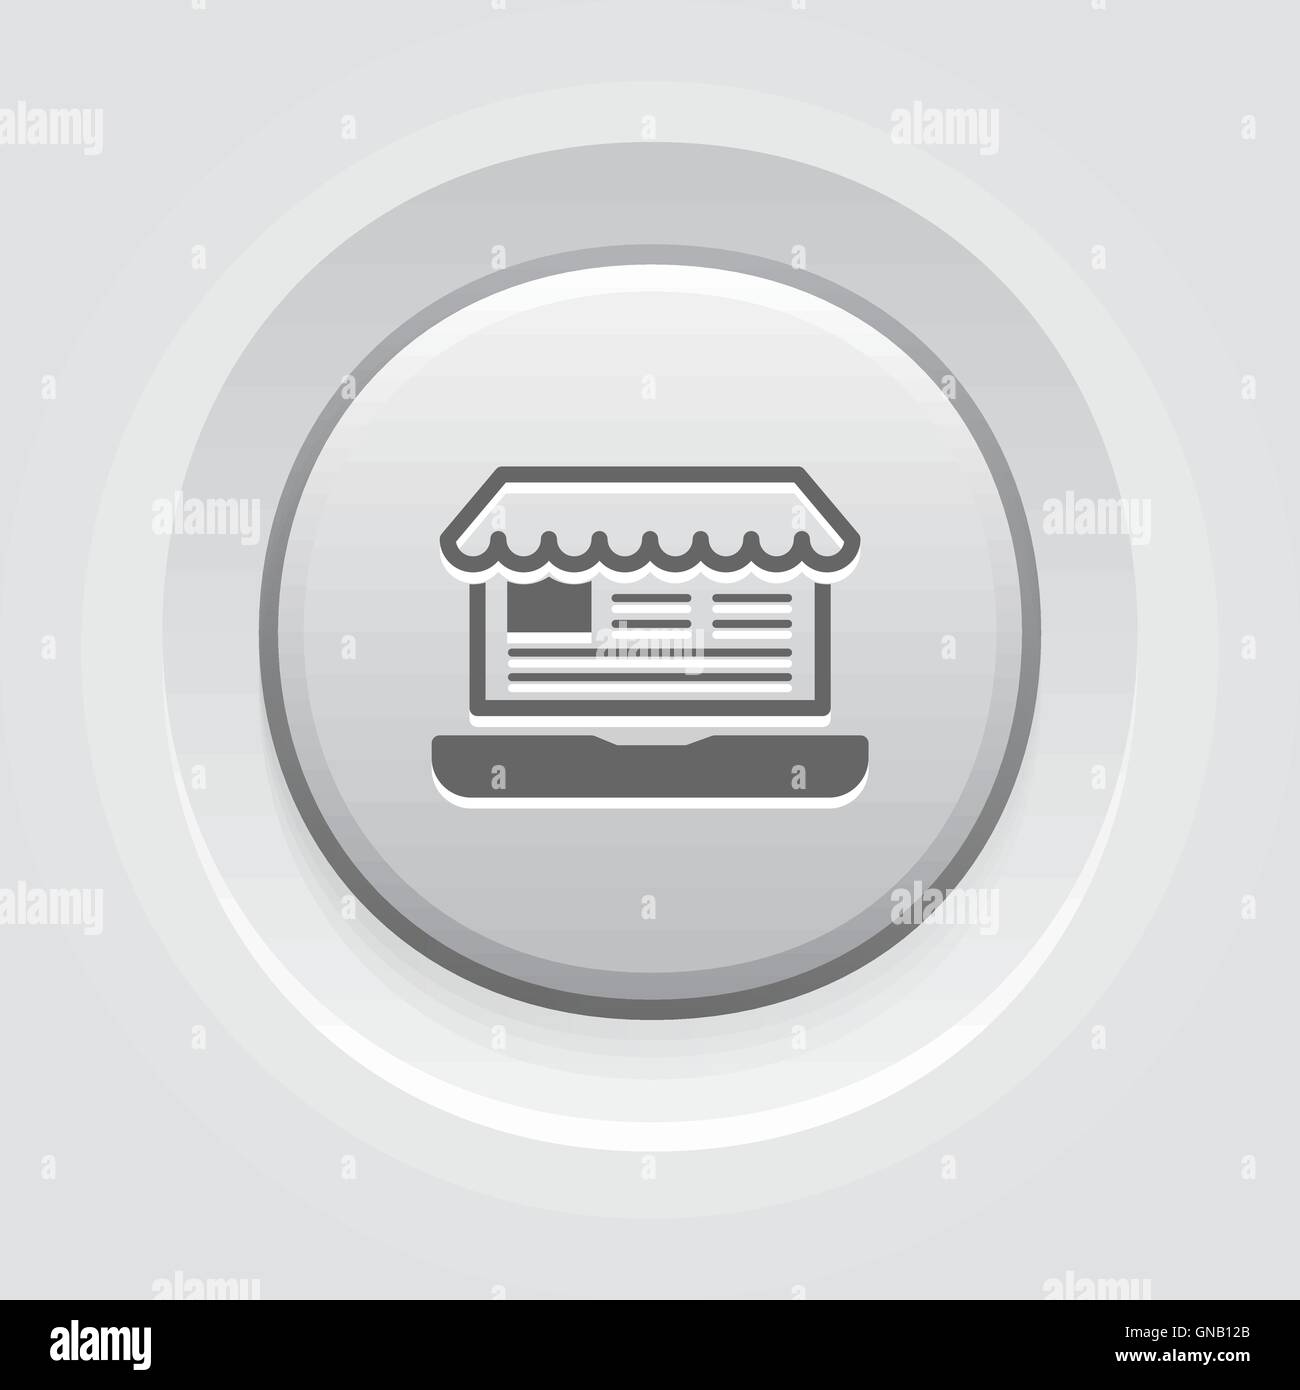 Online Store Icon. Business Concept Stock Vector